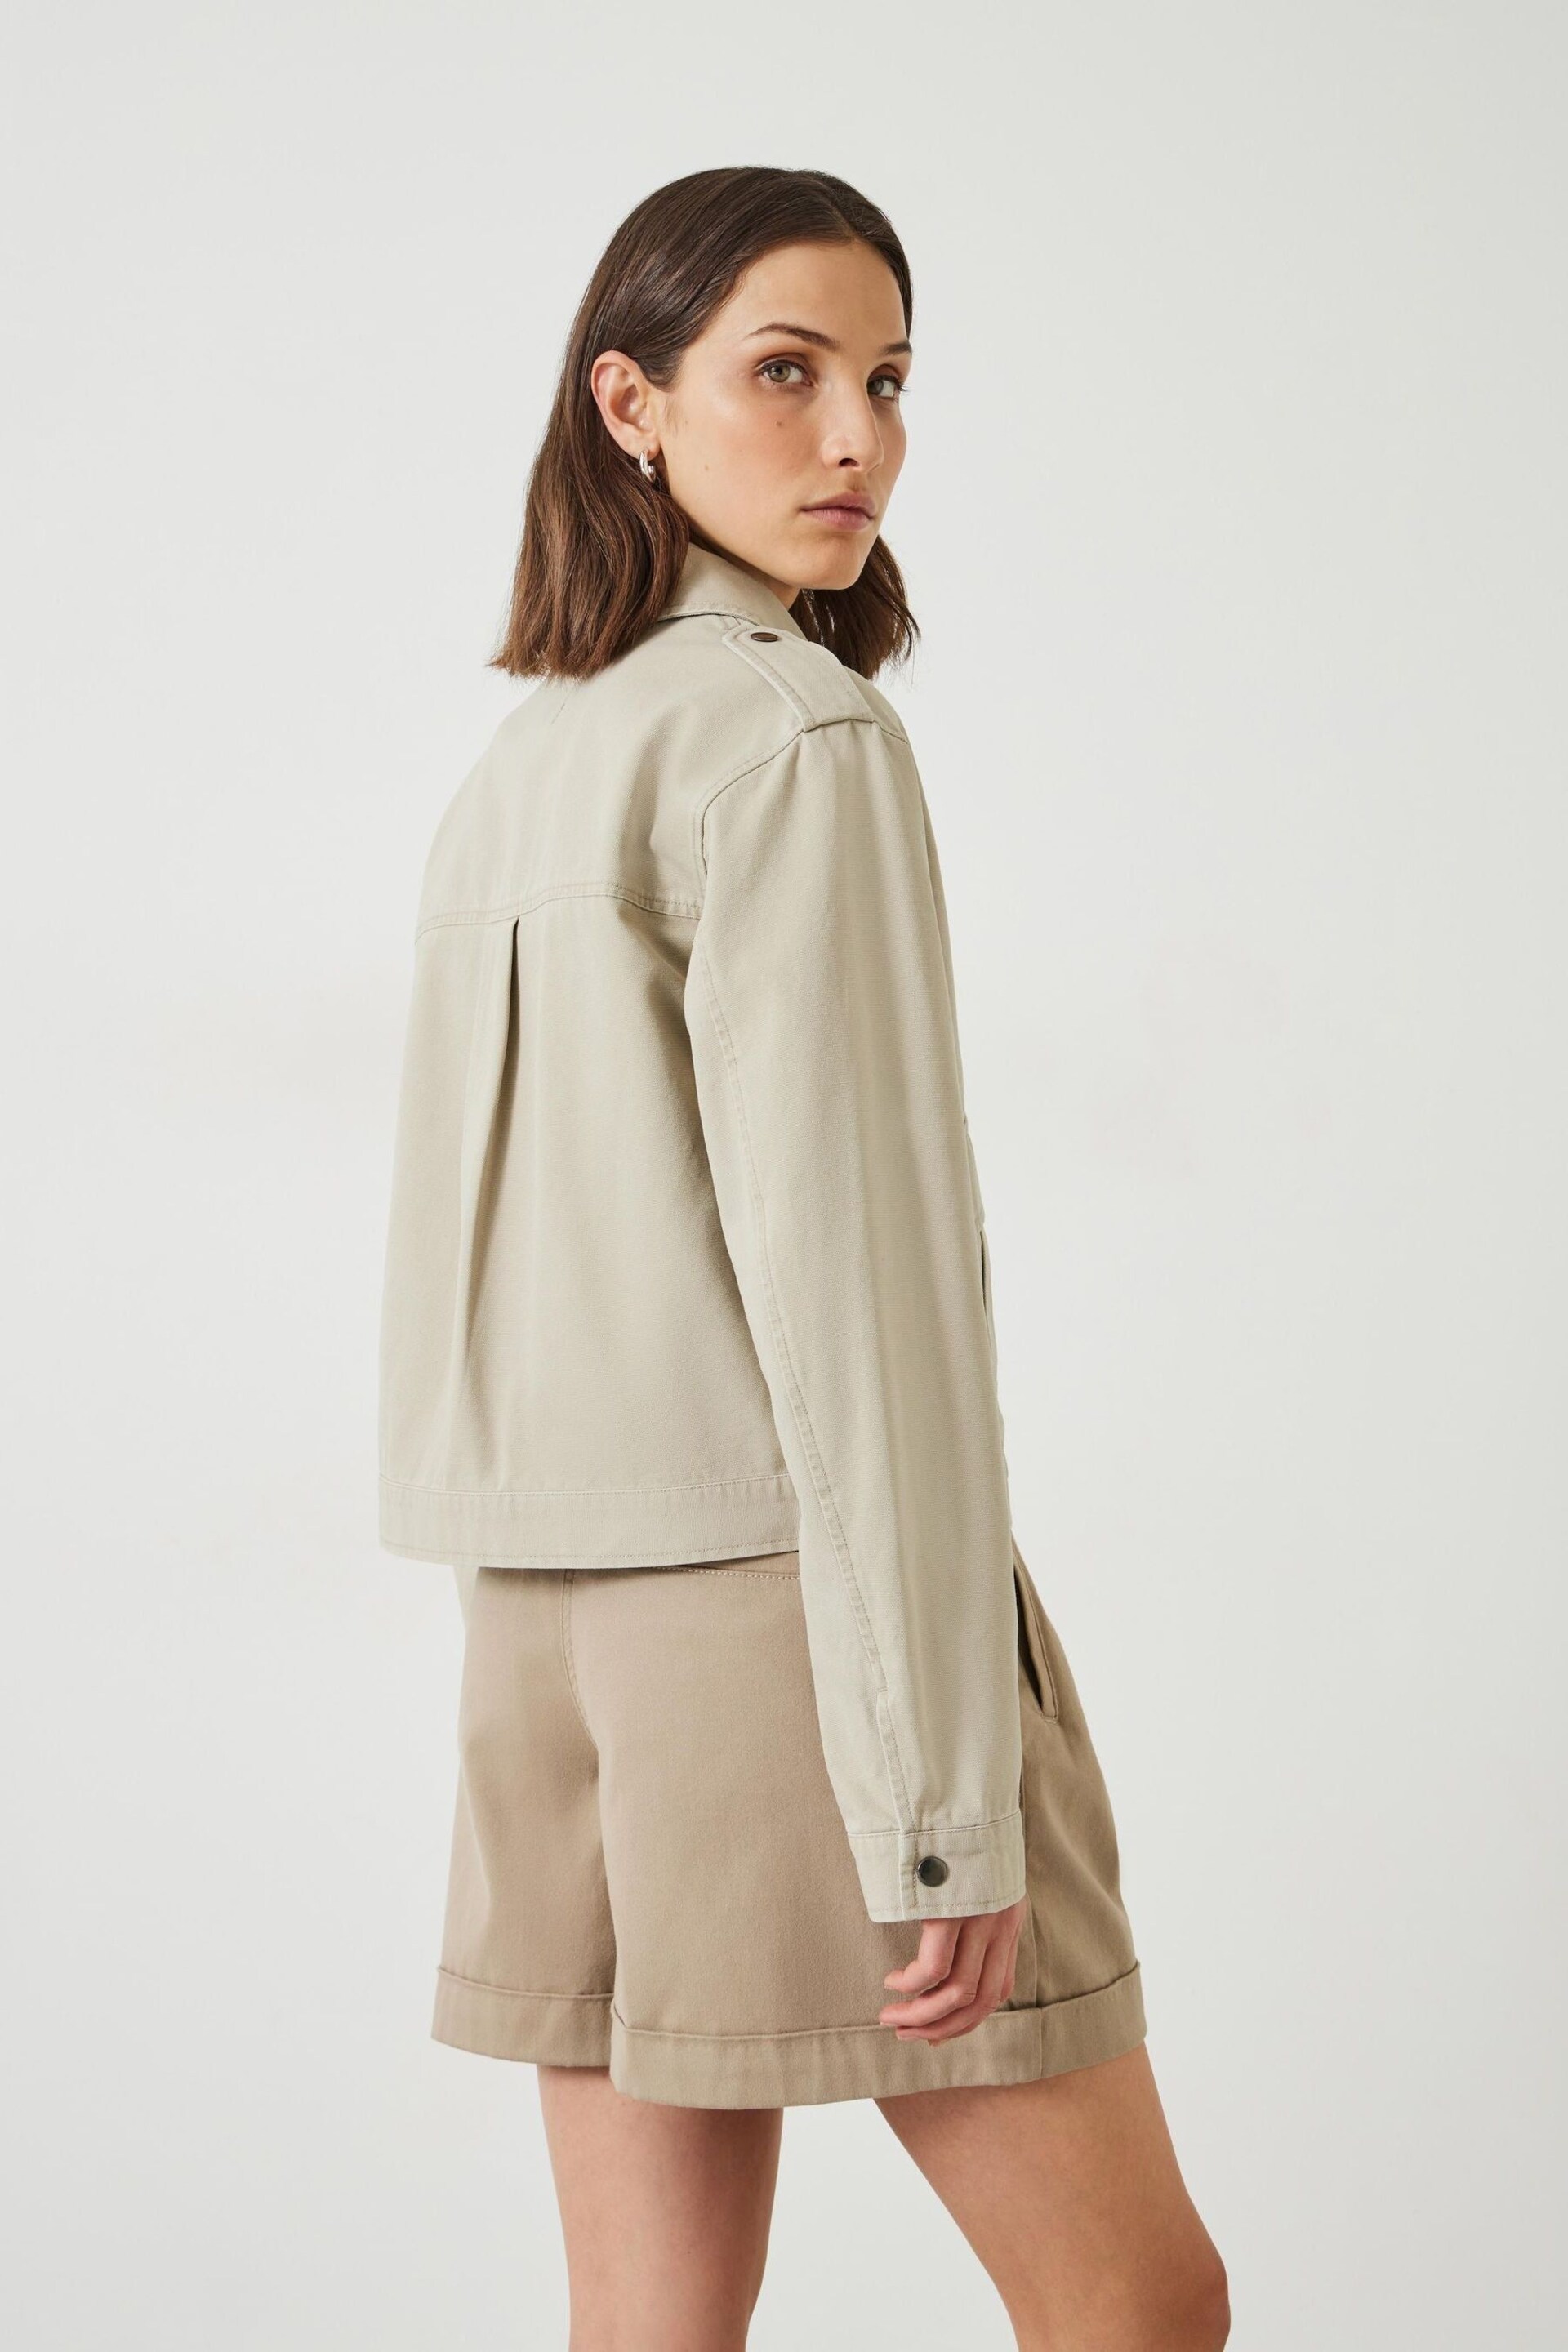 Hush Nude Laurie Zip Up Utility Jacket - Image 2 of 2